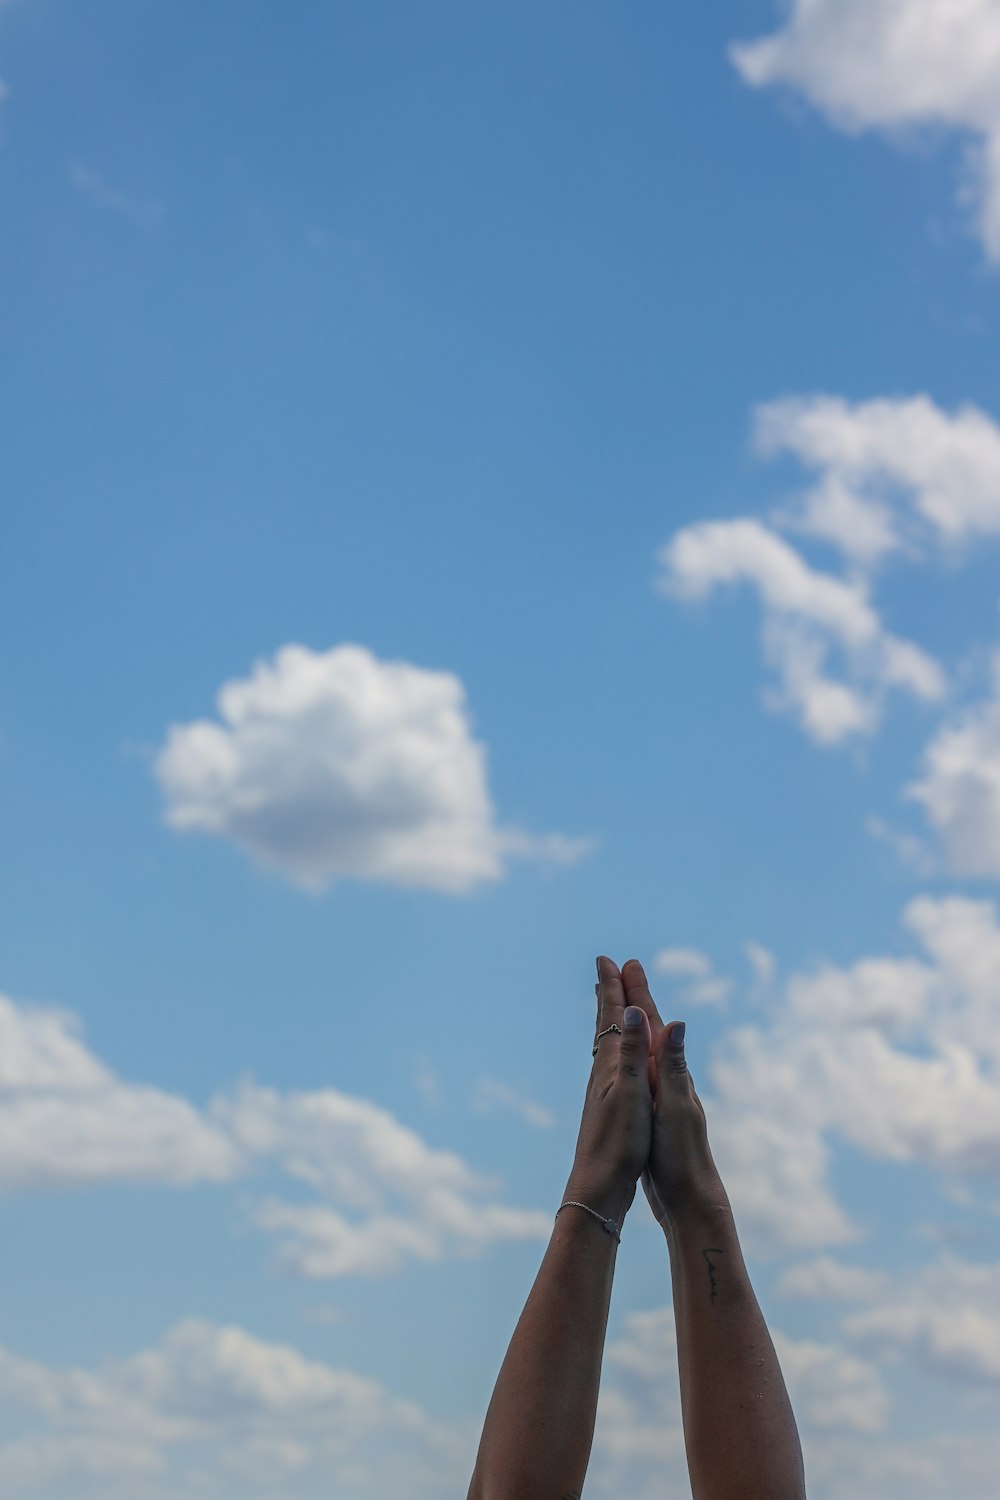 person raising his right hand under blue sky and white clouds during daytime